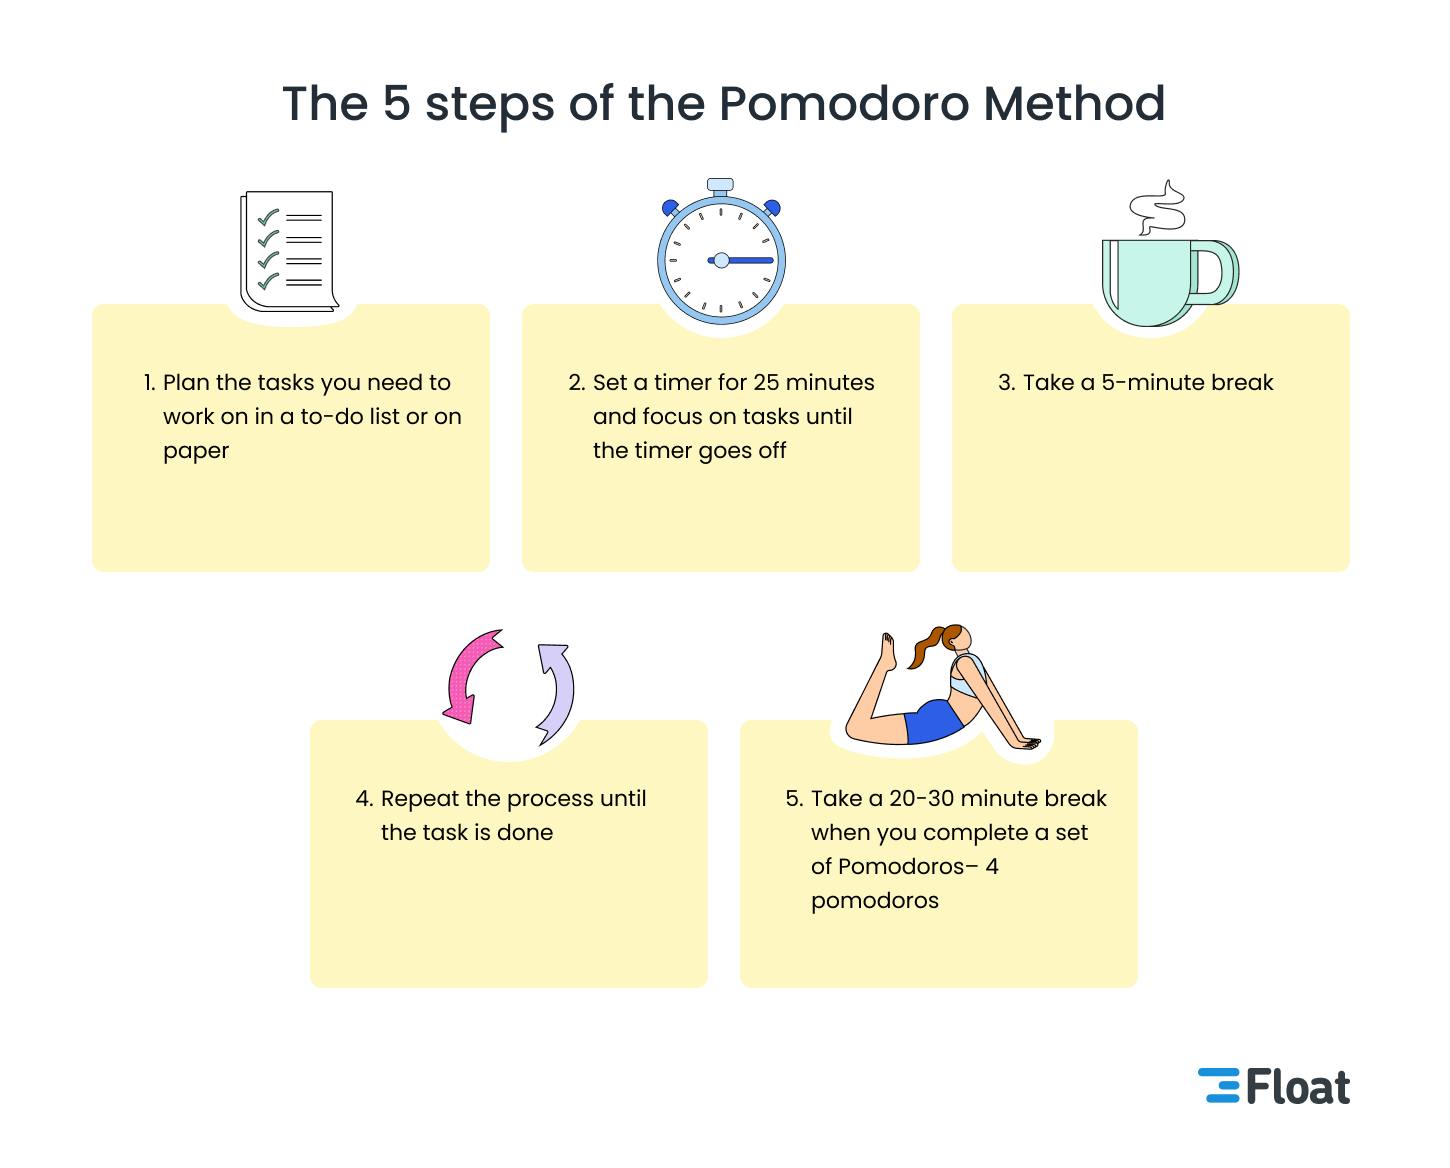 The Pomodoro technique: What it is and how it works